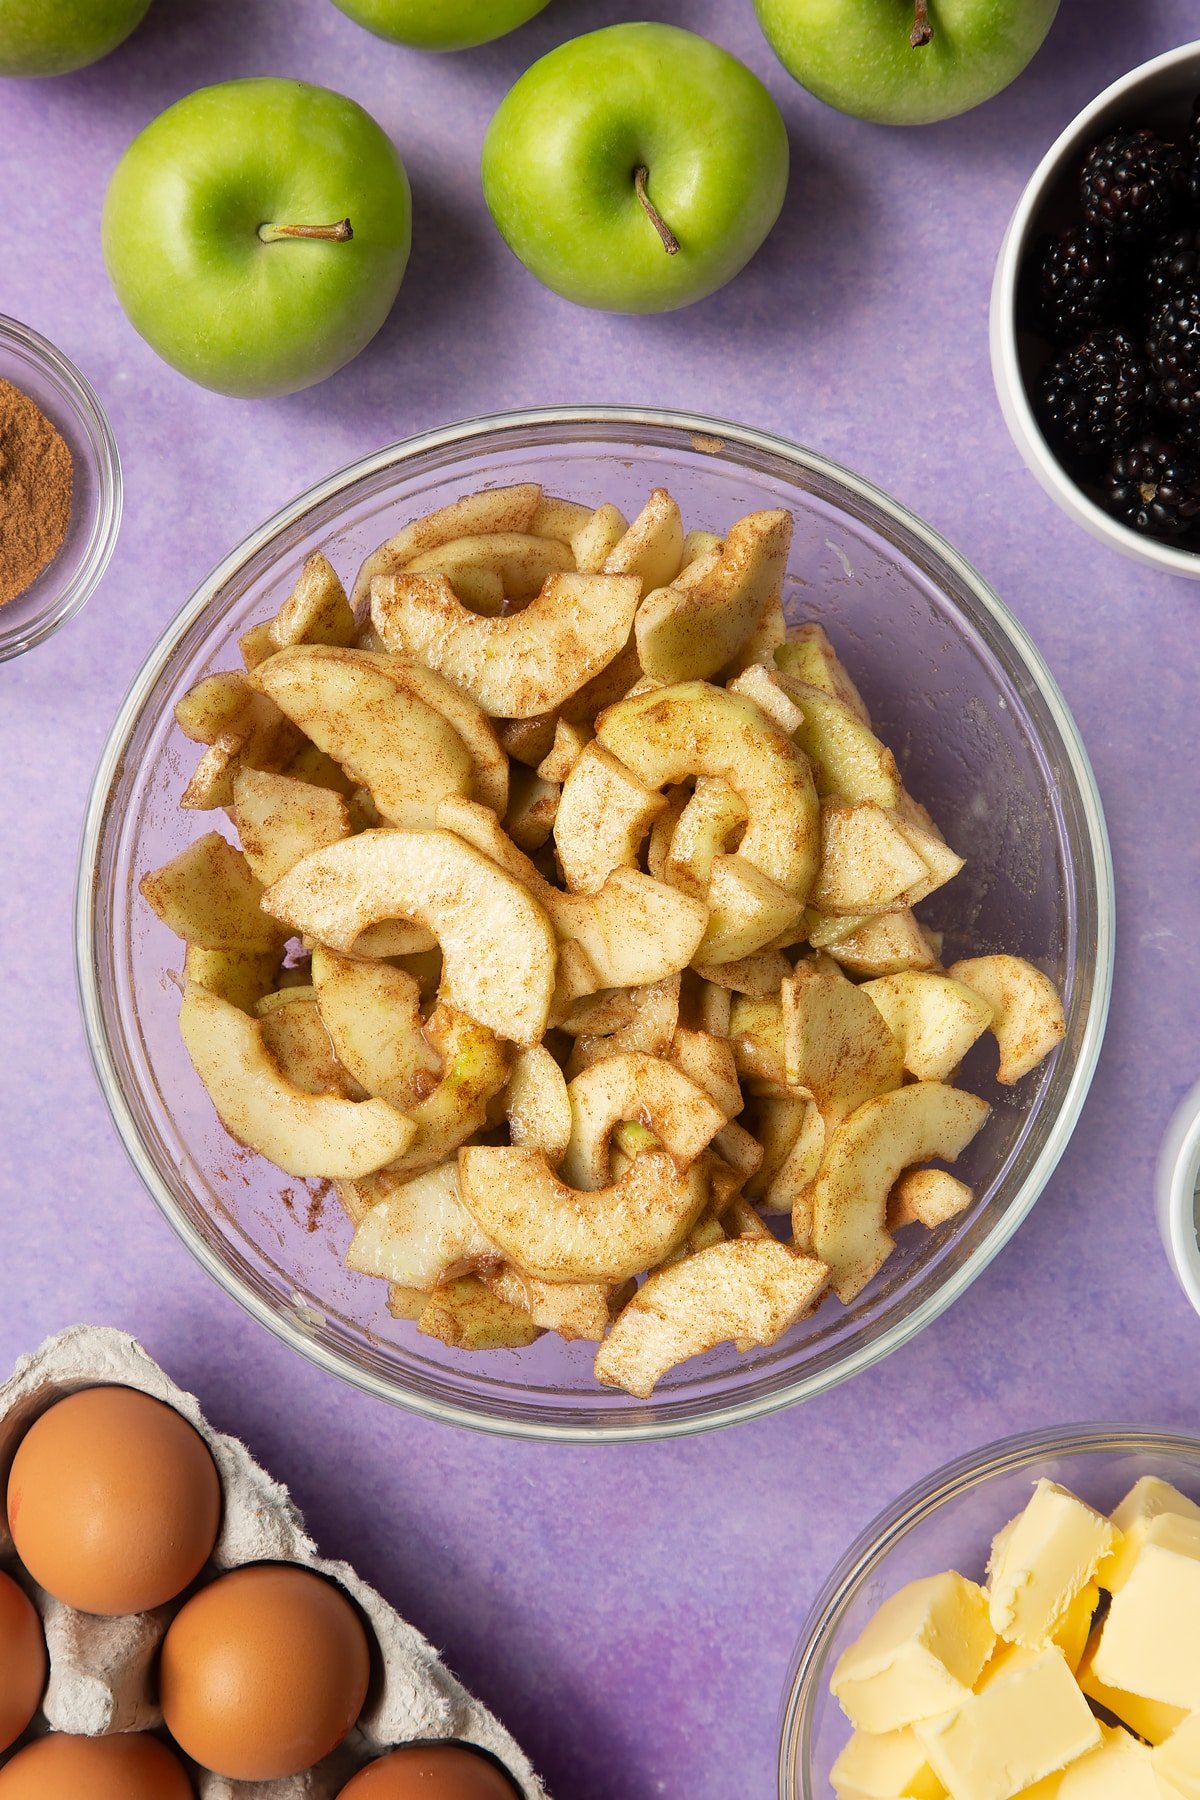 Apple slices mixed with with sugar and cinnamon in a glass mixing bowl. Ingredients to make apple and blackberry pie surround the bowl.